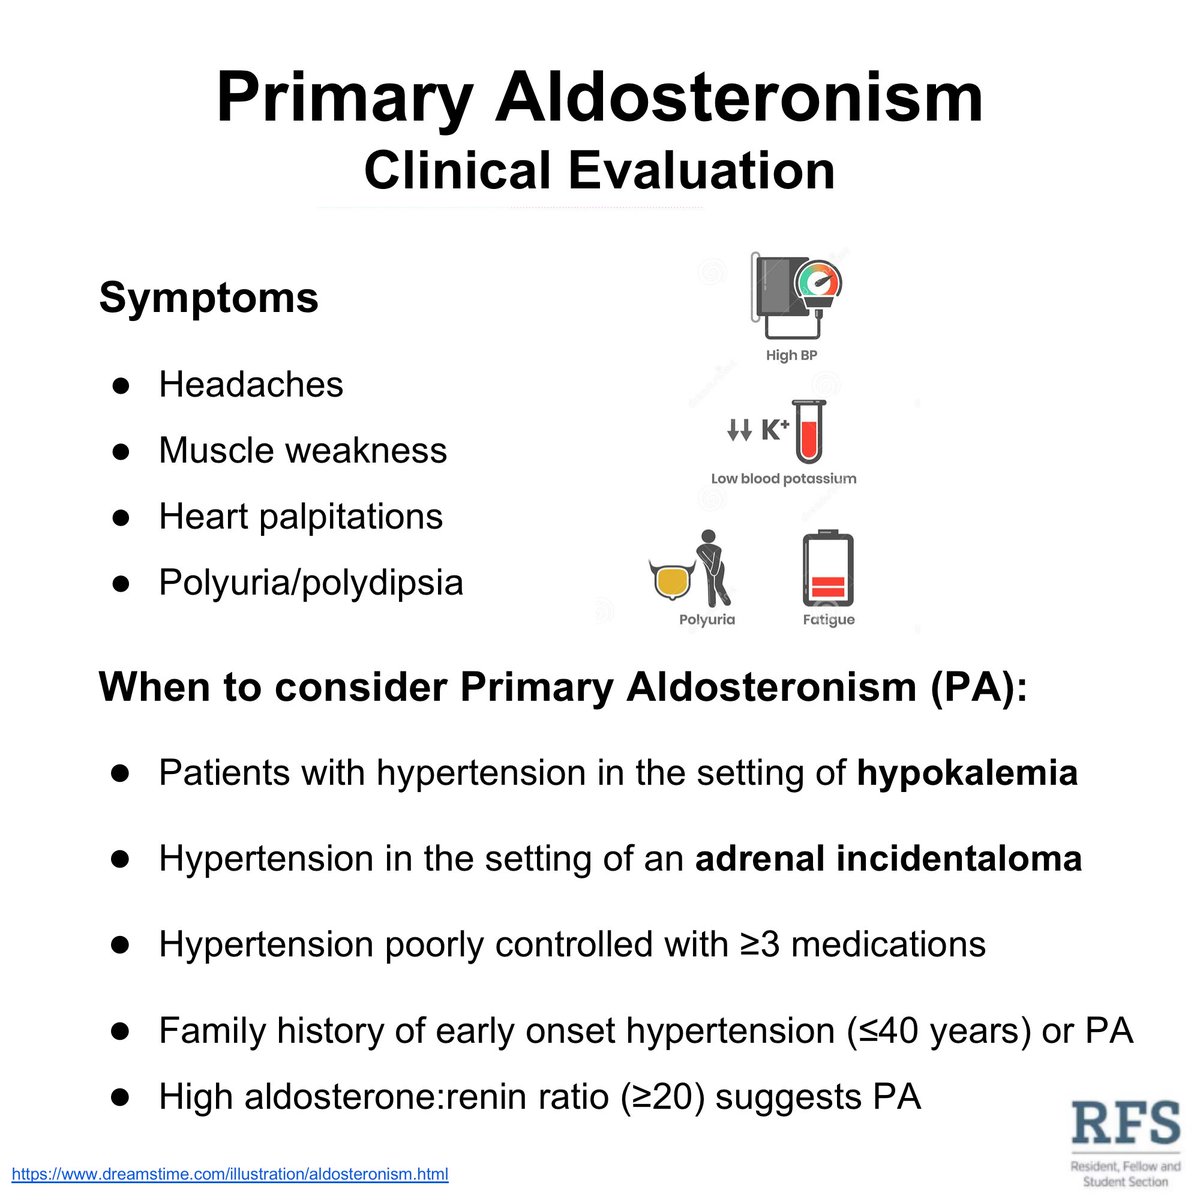 Primary aldosteronism should be considered in the setting of hypertension and hypokalemia.